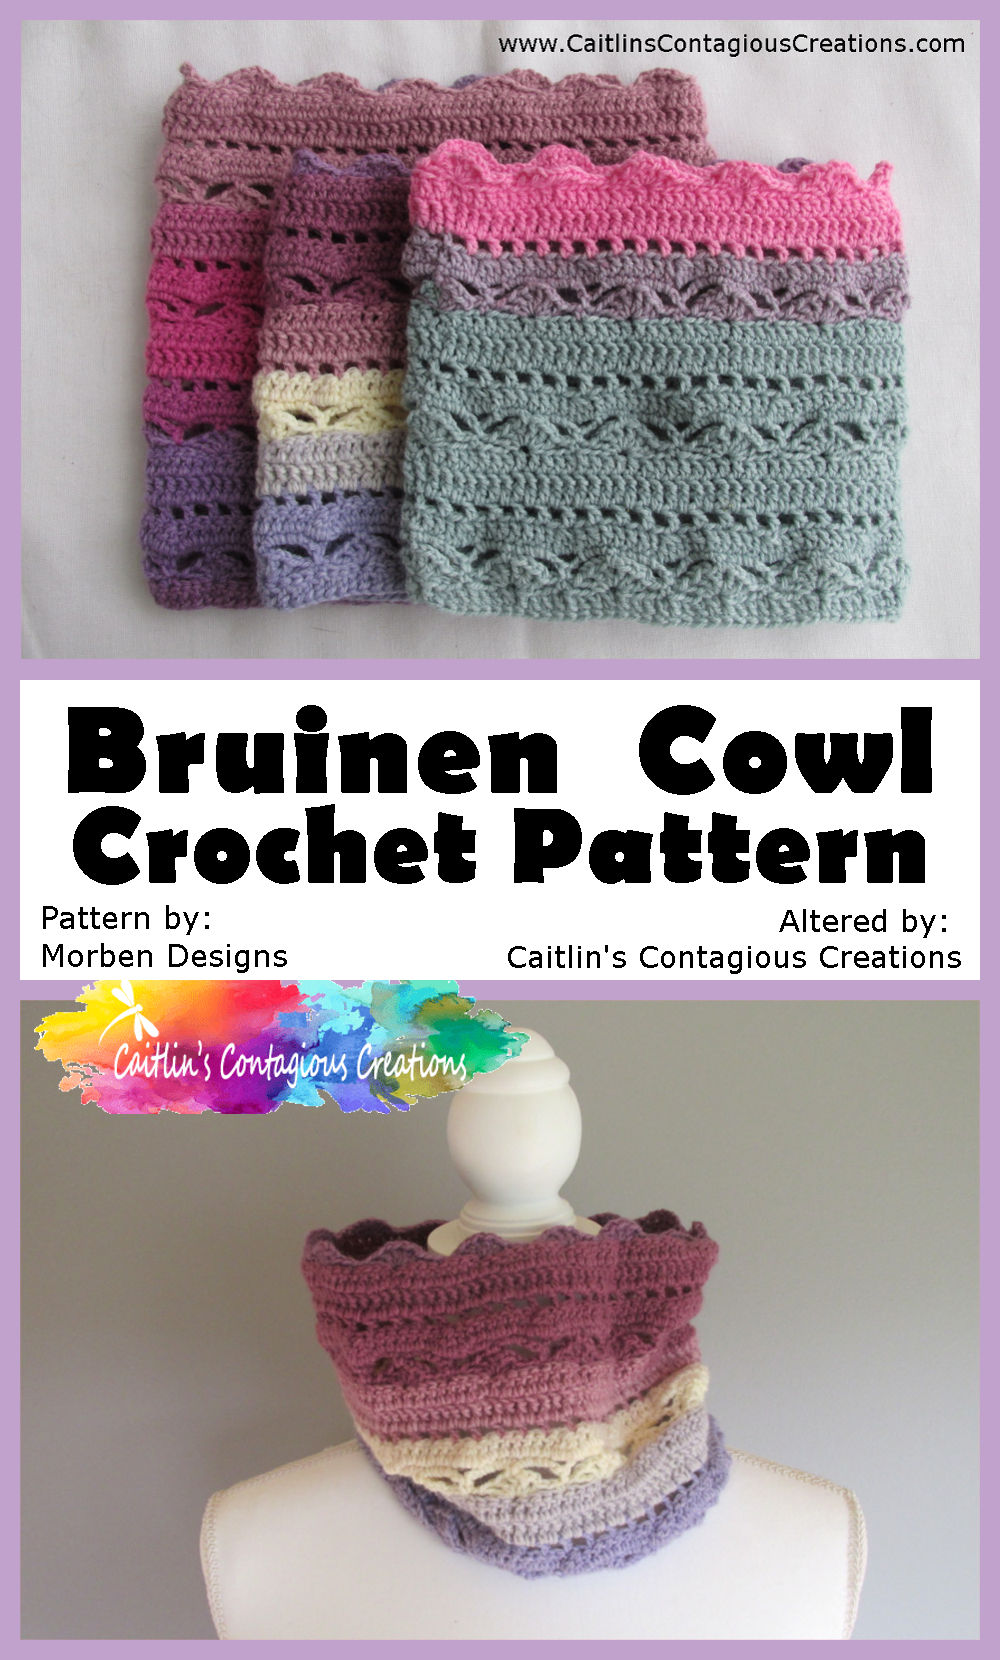 A Free photo tutorial to turn the Bruinen crochet pattern from Morben Designs into a cowl! This neckwarmer is easy and fun to make. Caitlin's Contagious Creations has provided step by step instructions to make it even easier! Get started today, just in time for Spring!